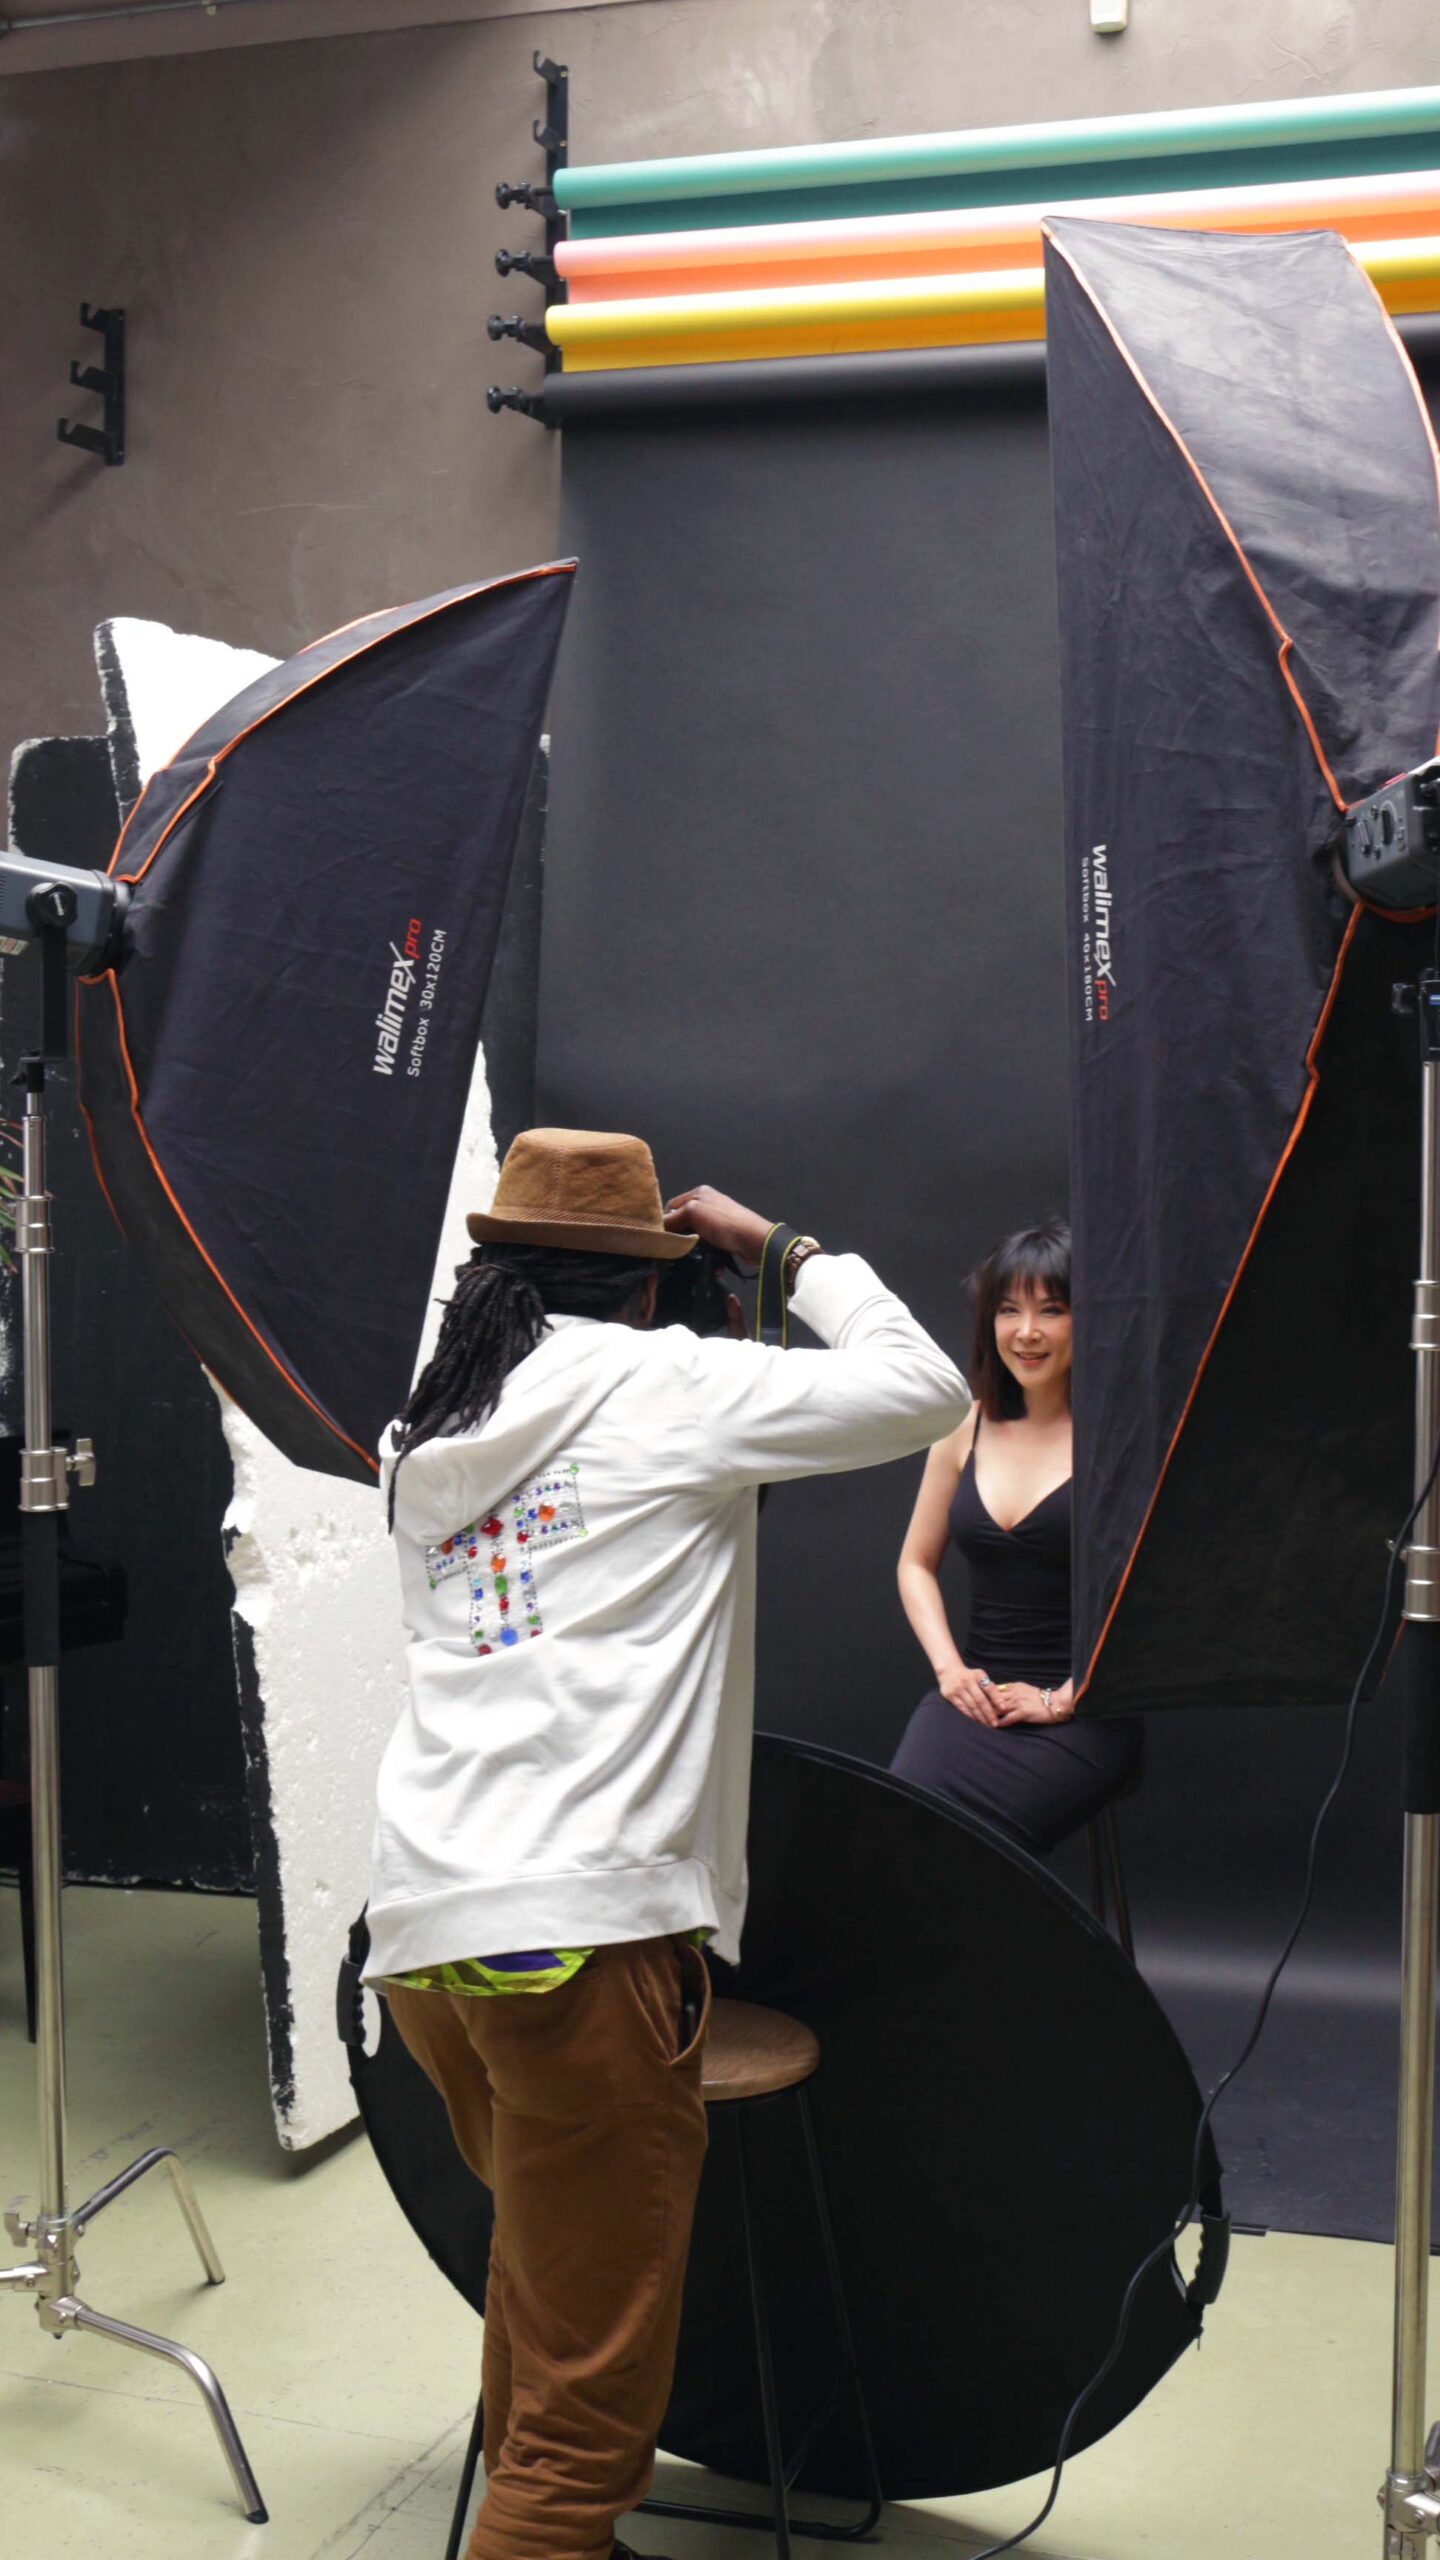 In a photography studio, a Black photographer is capturing an image of a smiling East Asian woman. The woman sits confidently, her expression radiating joy and warmth.